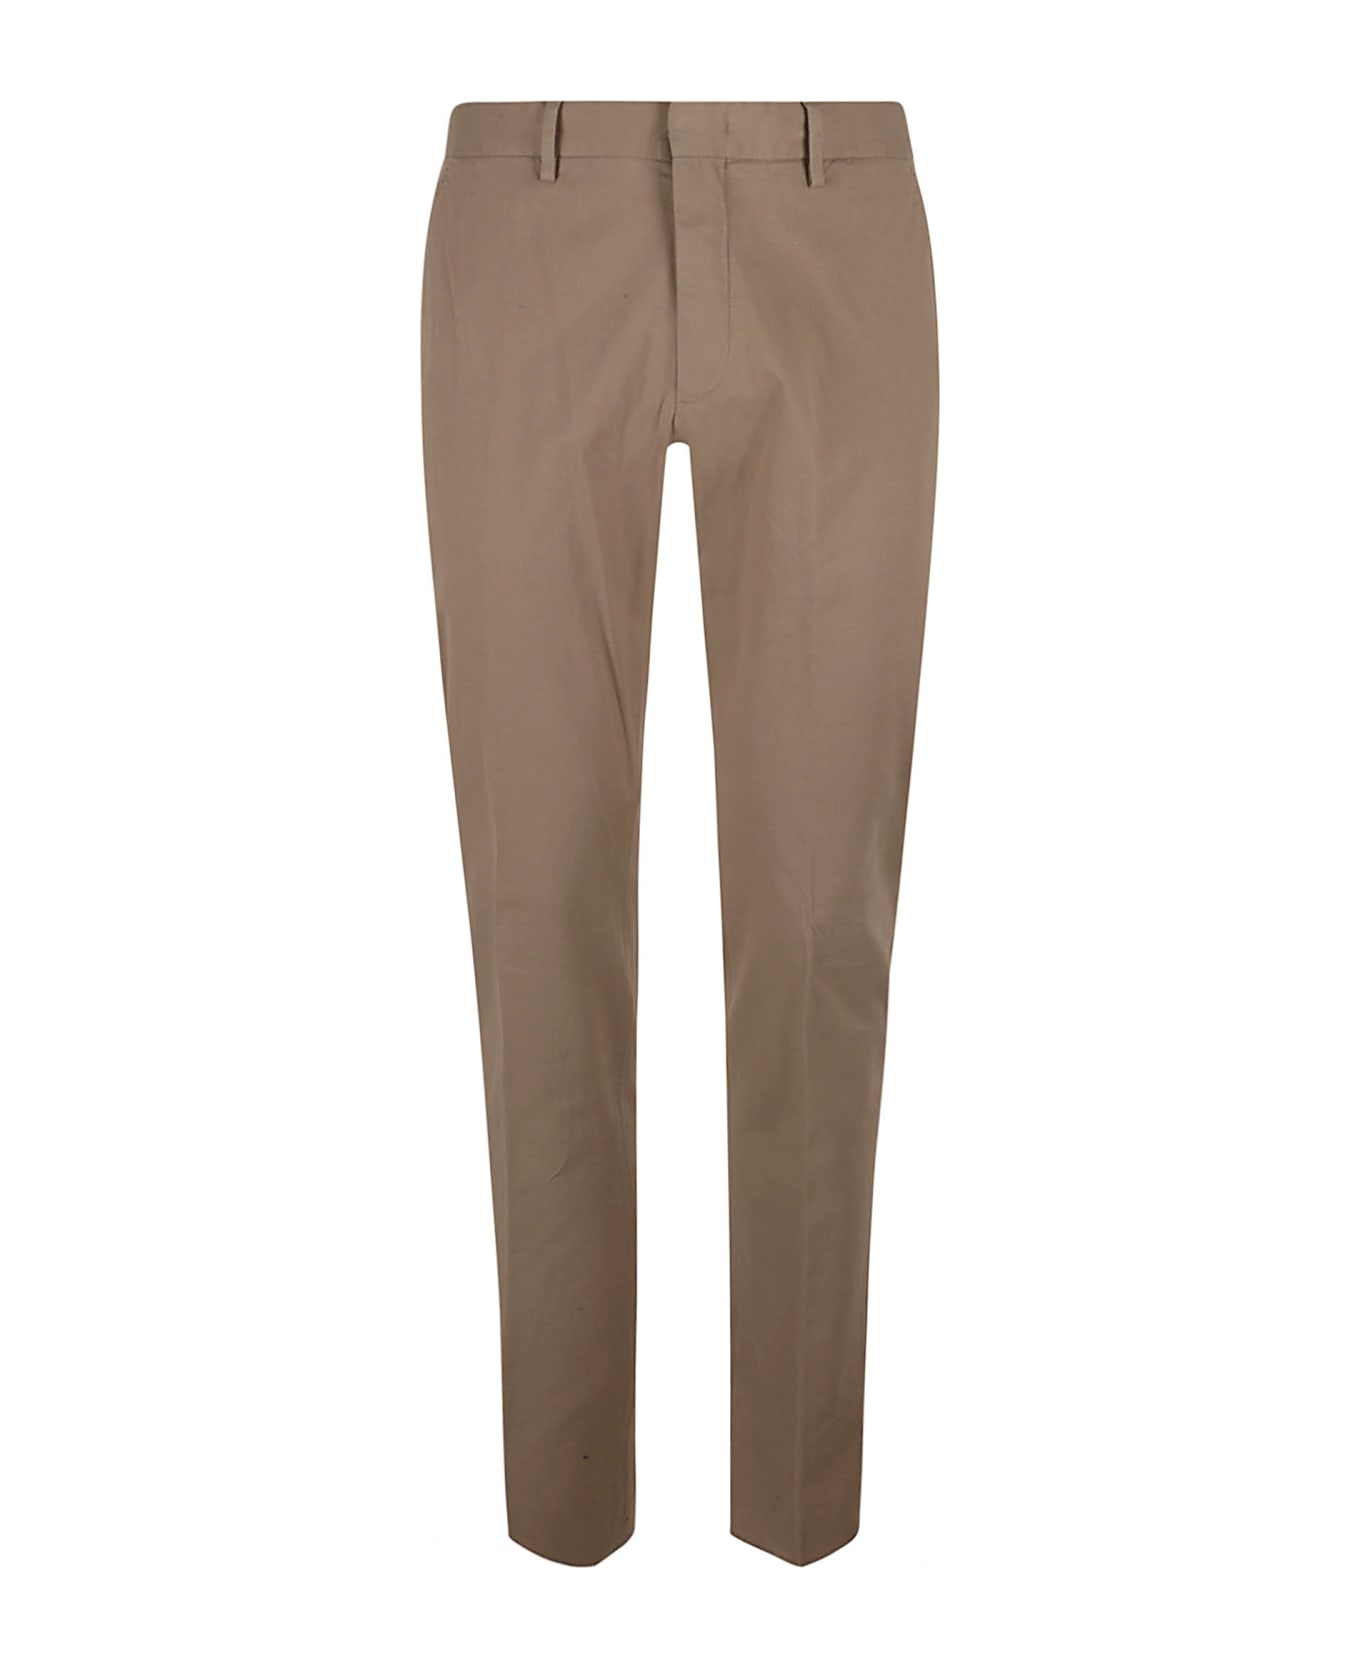 Zegna Concealed Trousers - GREY